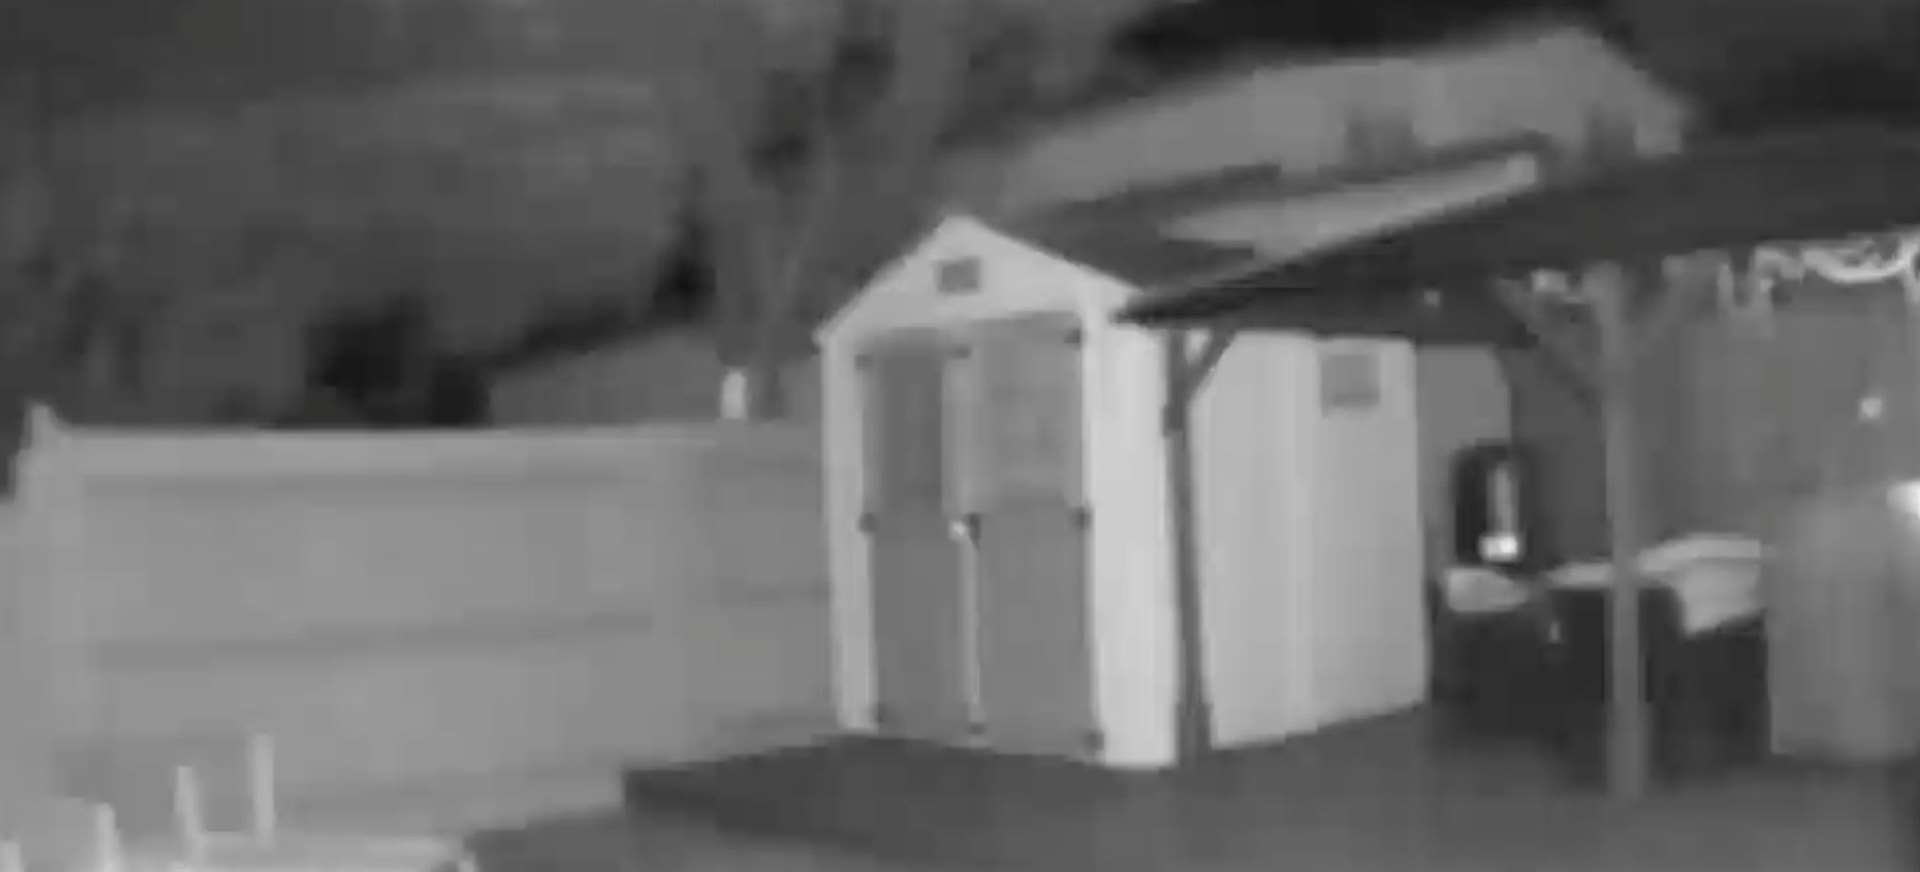 'Brazen' thieves have be captured stealing from sheds on CCTV